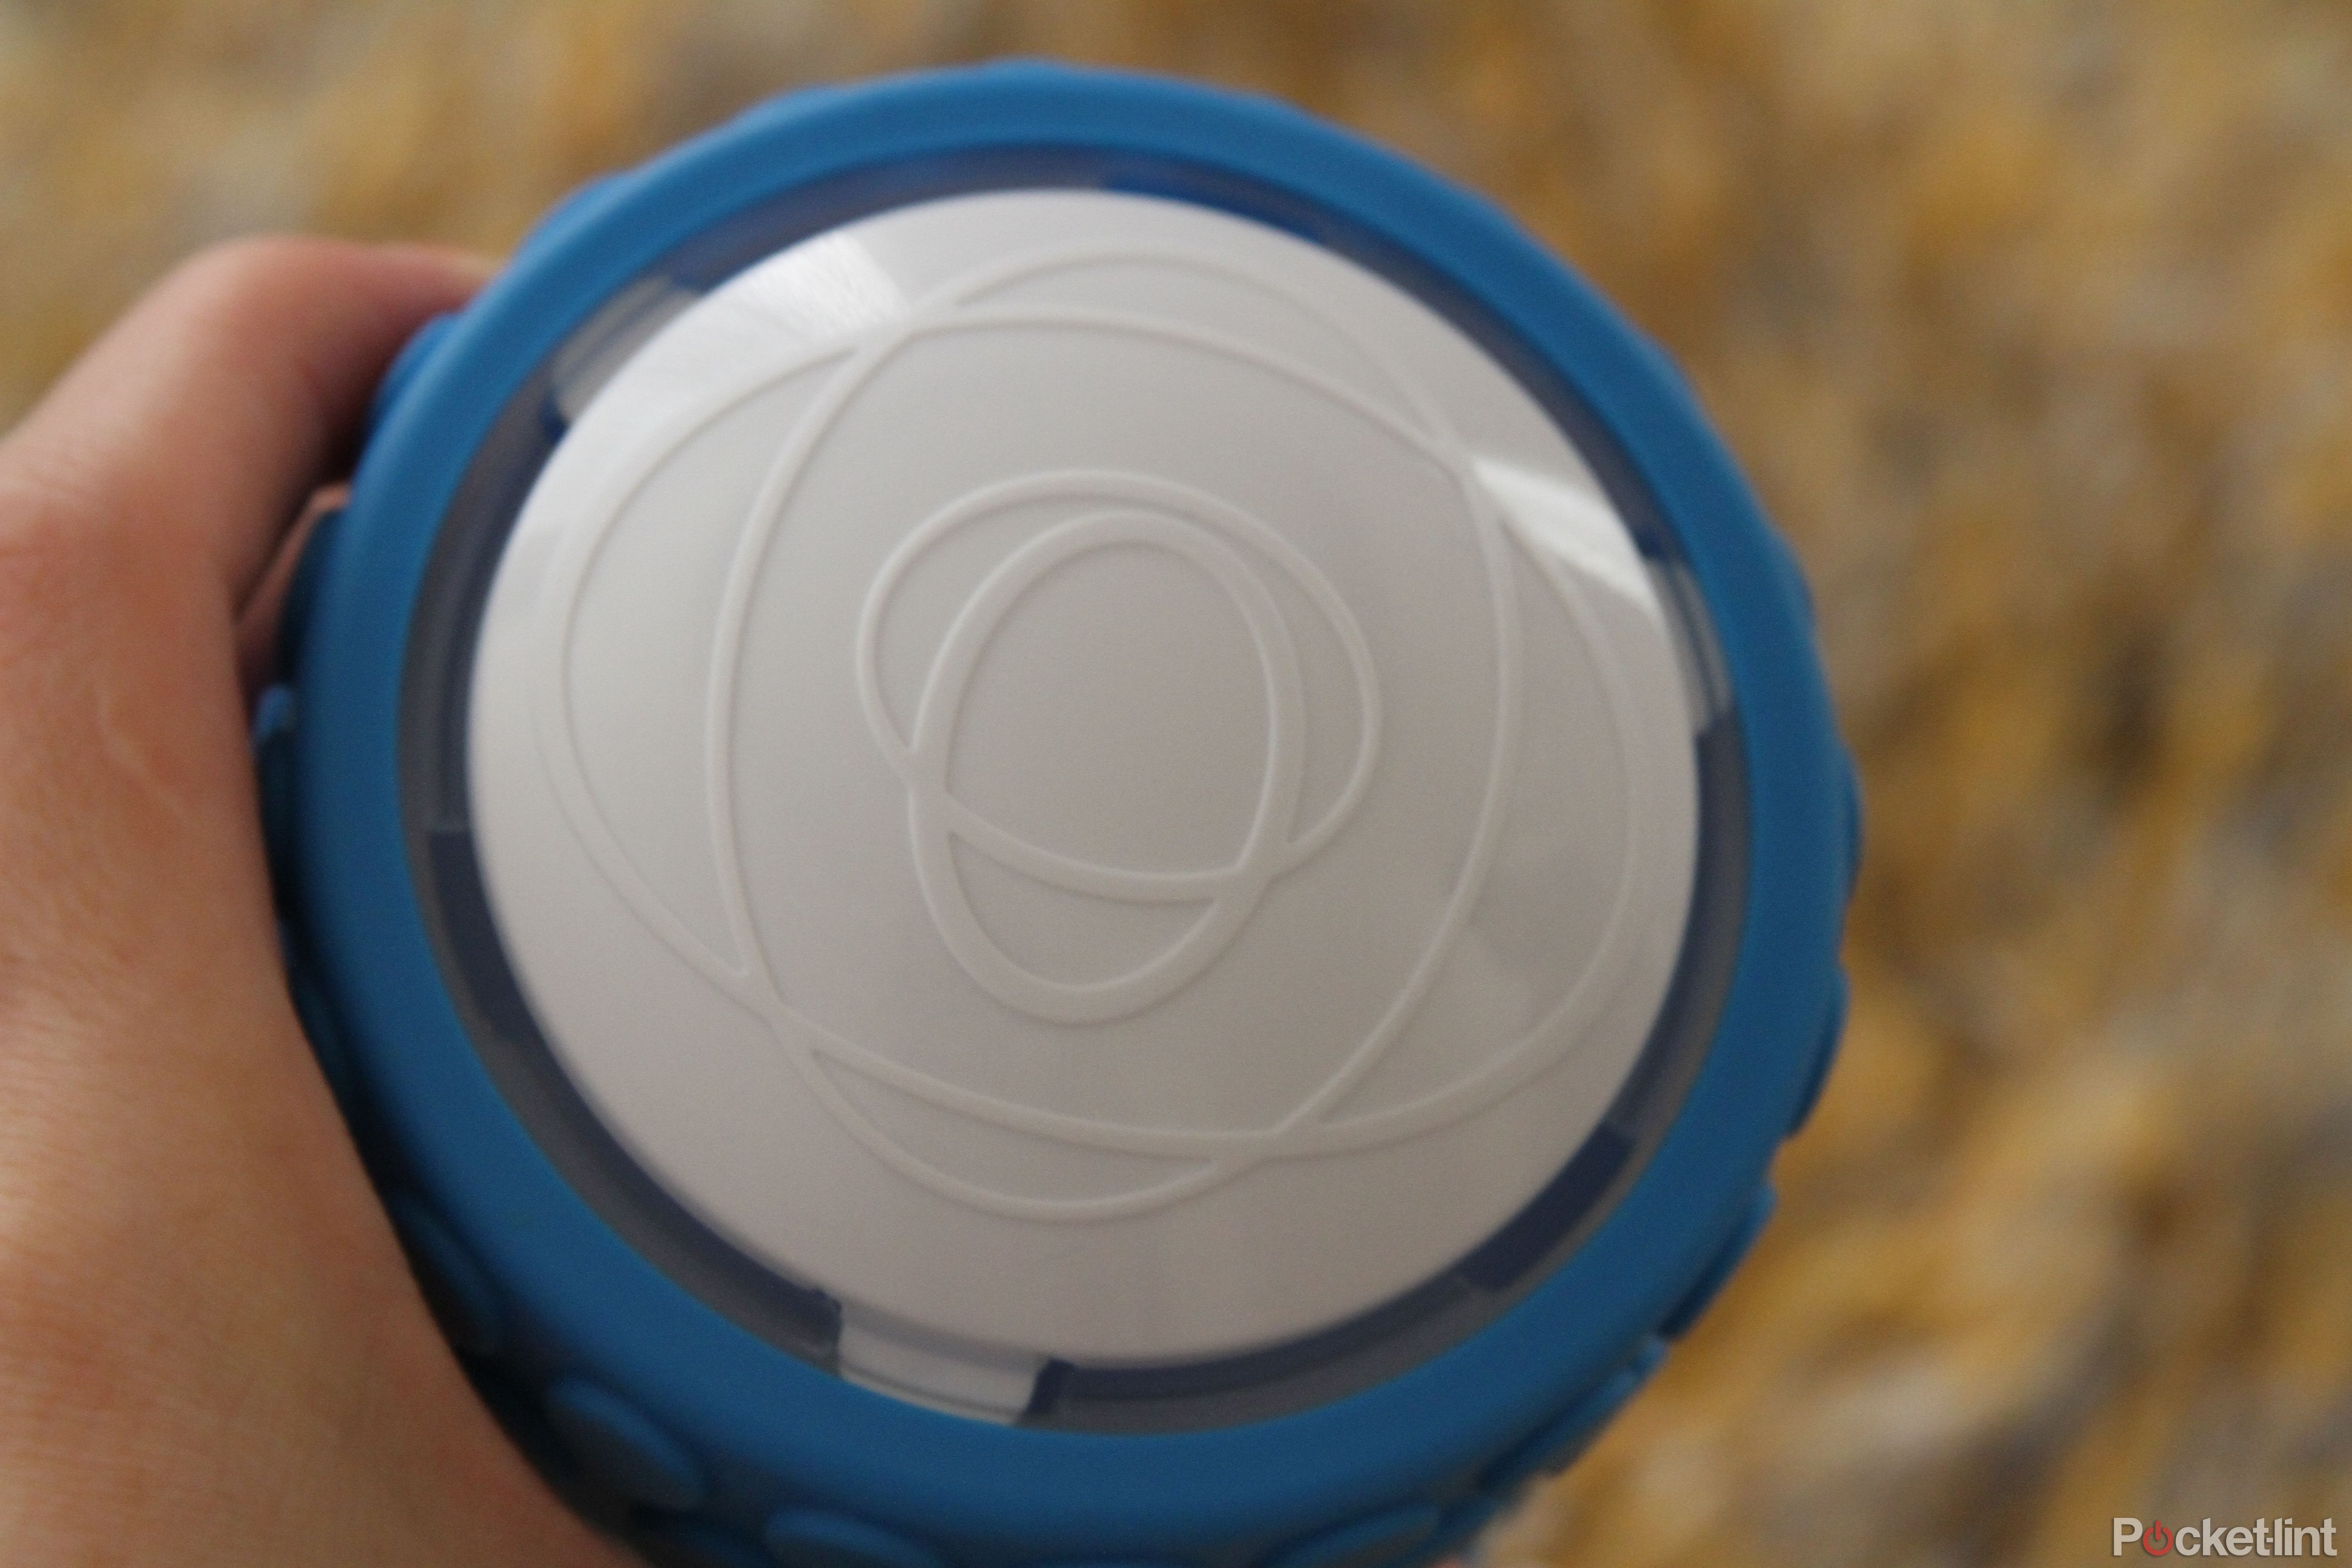 sphero ollie hands on review cylindrical fast and totally cool image 9